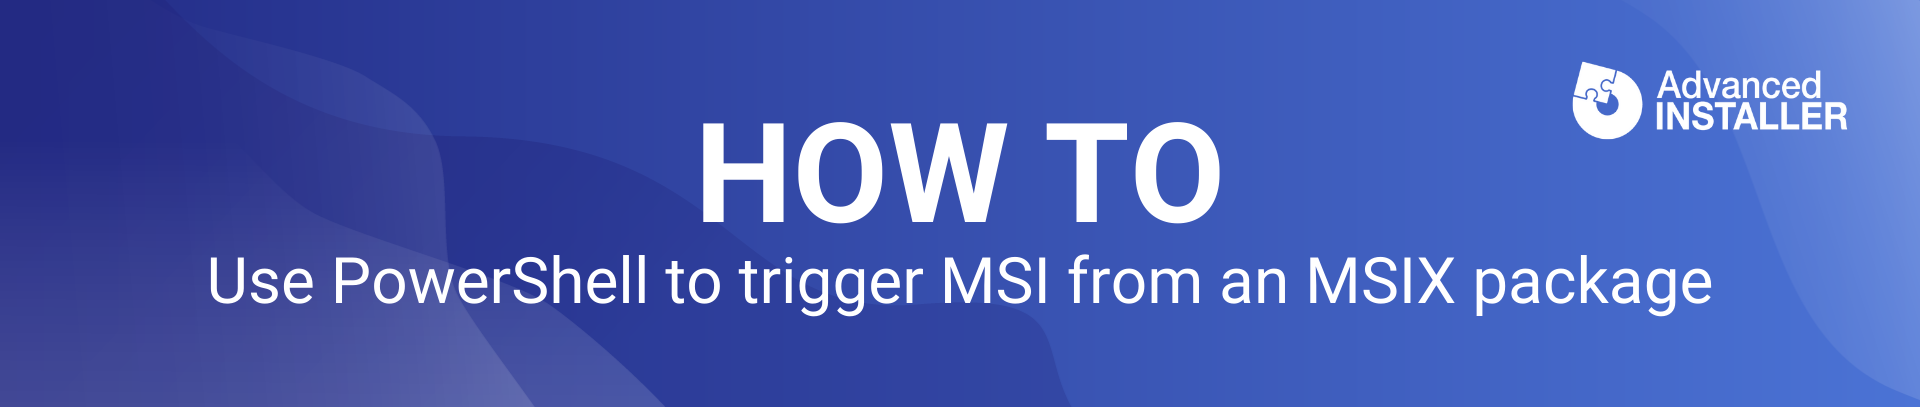 Trigger msi installation from msix